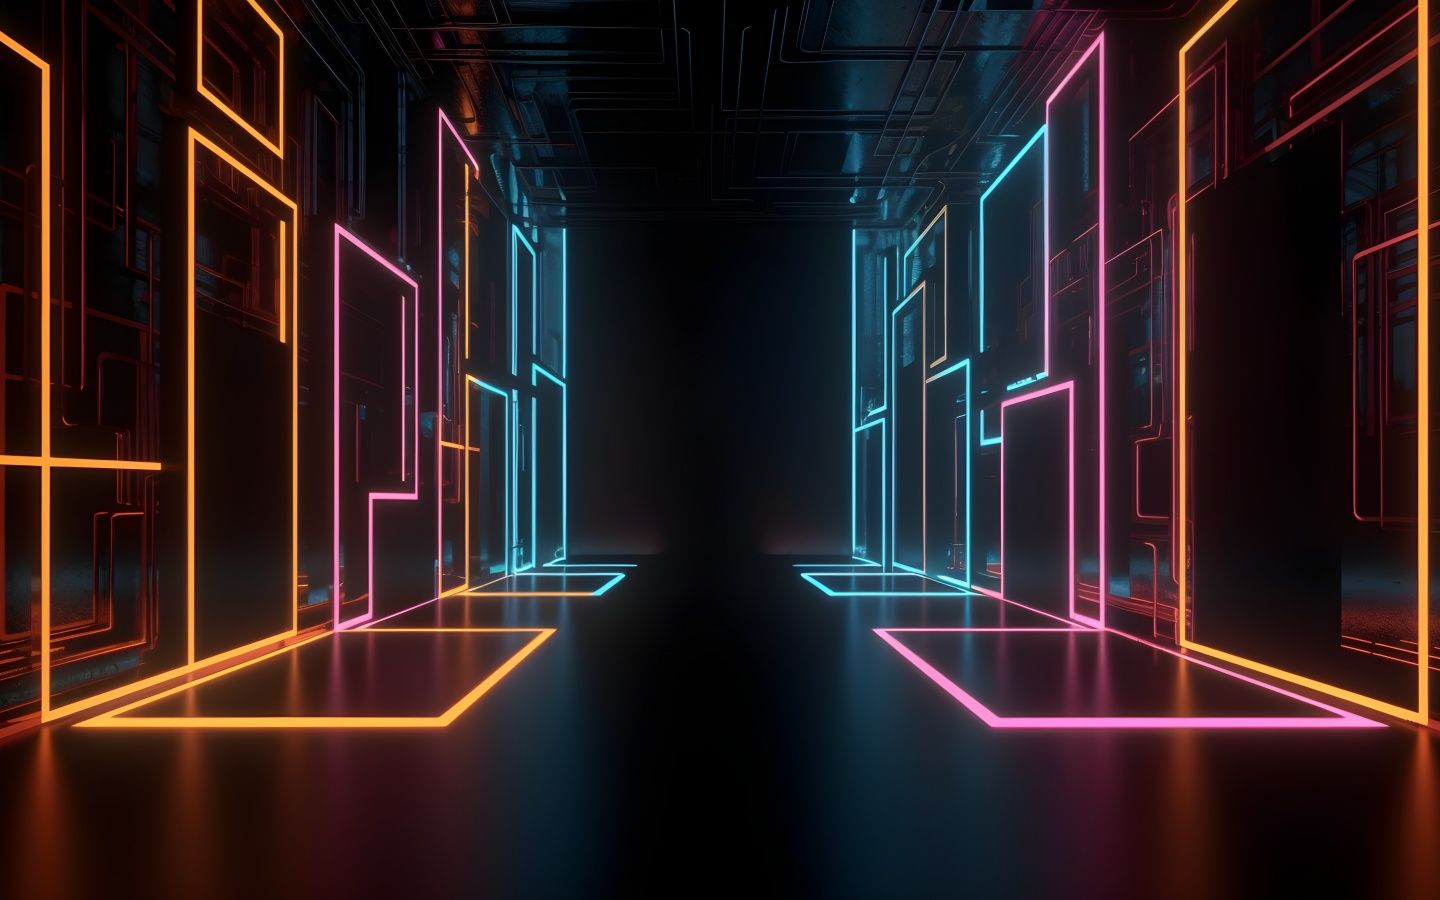 A black room with a neon blue and pink border - 1440x900